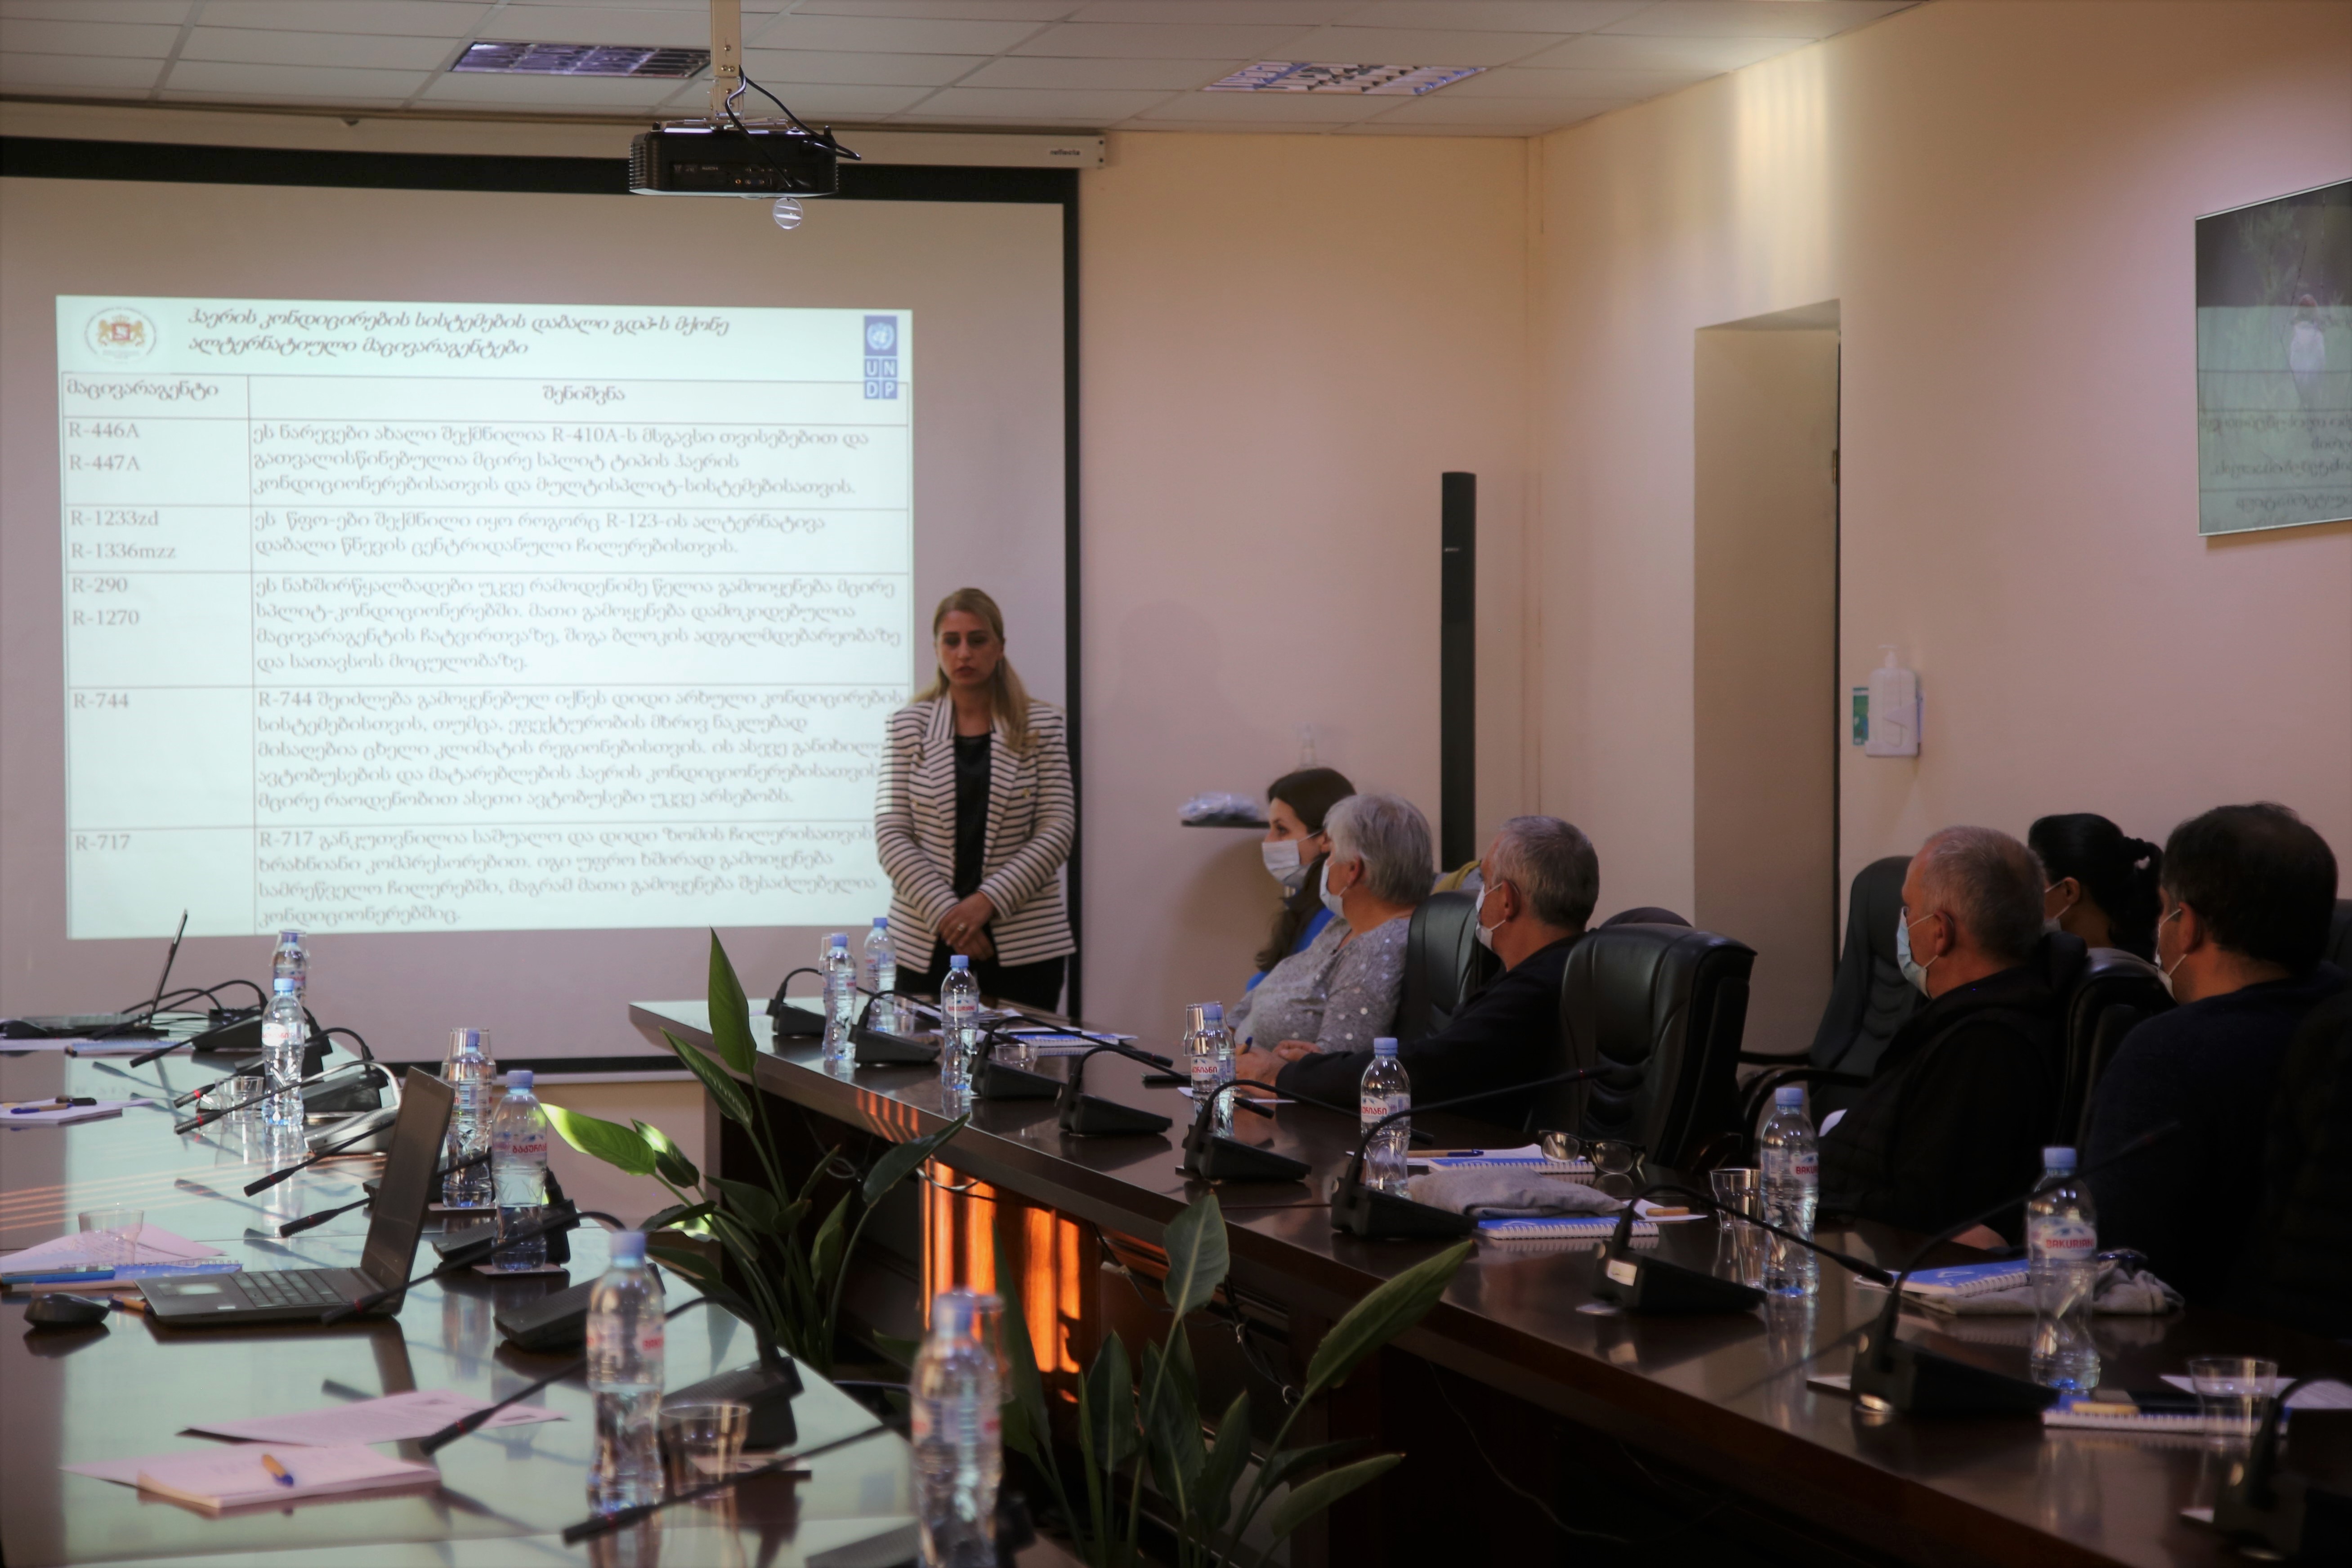 Training was held for certified technicians in the refrigeration equipment and air conditioning sectors